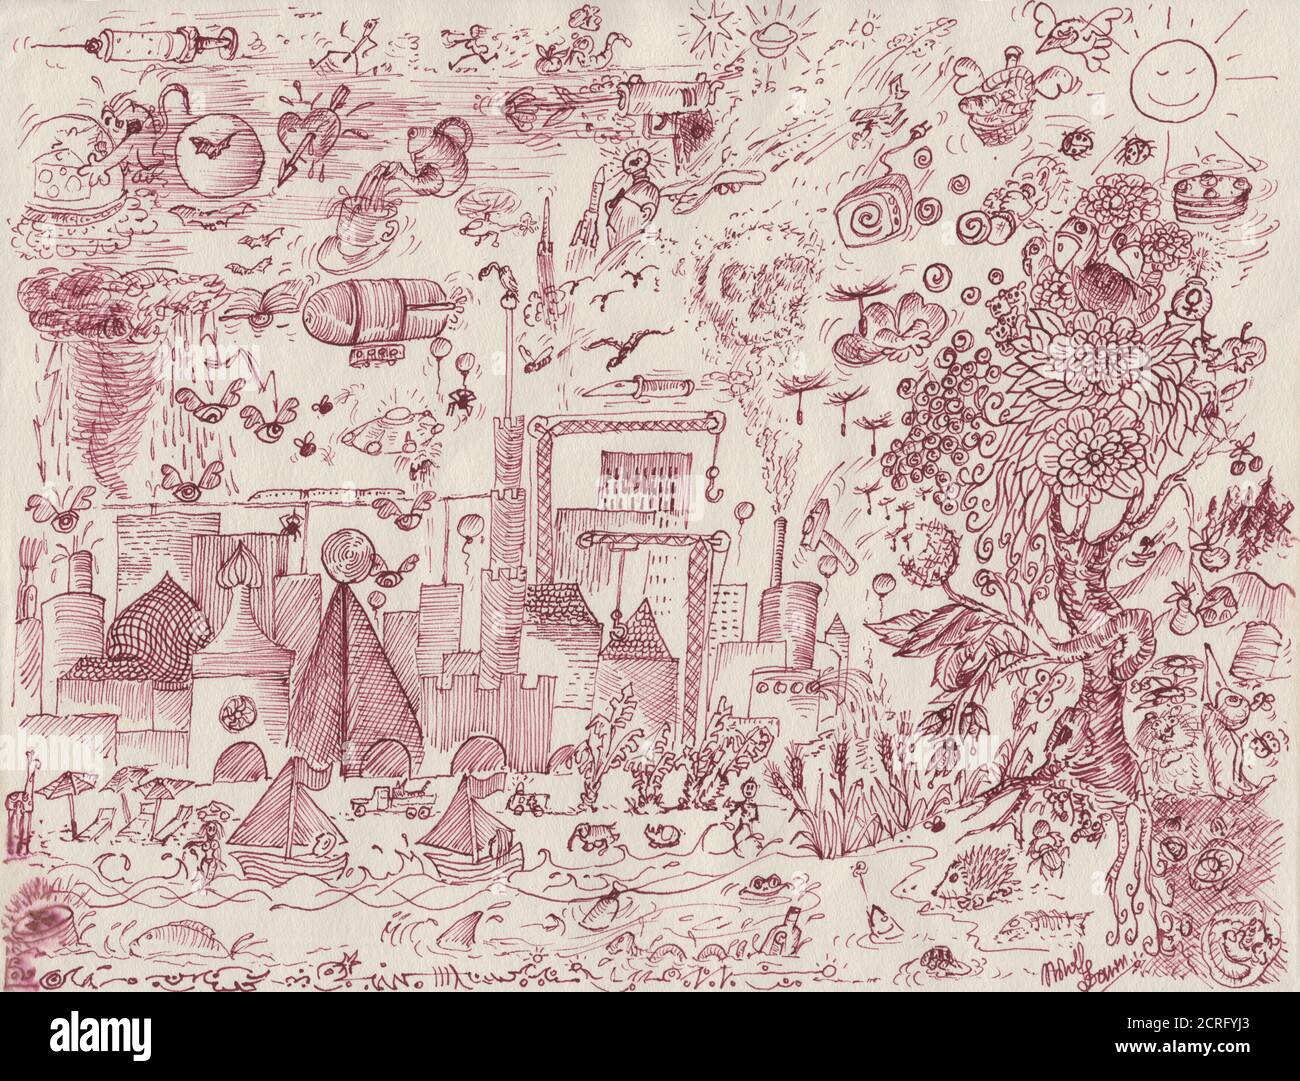 Pen drawing full with details called dreamworld. Dark red ink used. It looks a bit like Alice in Wonderland Stock Photo